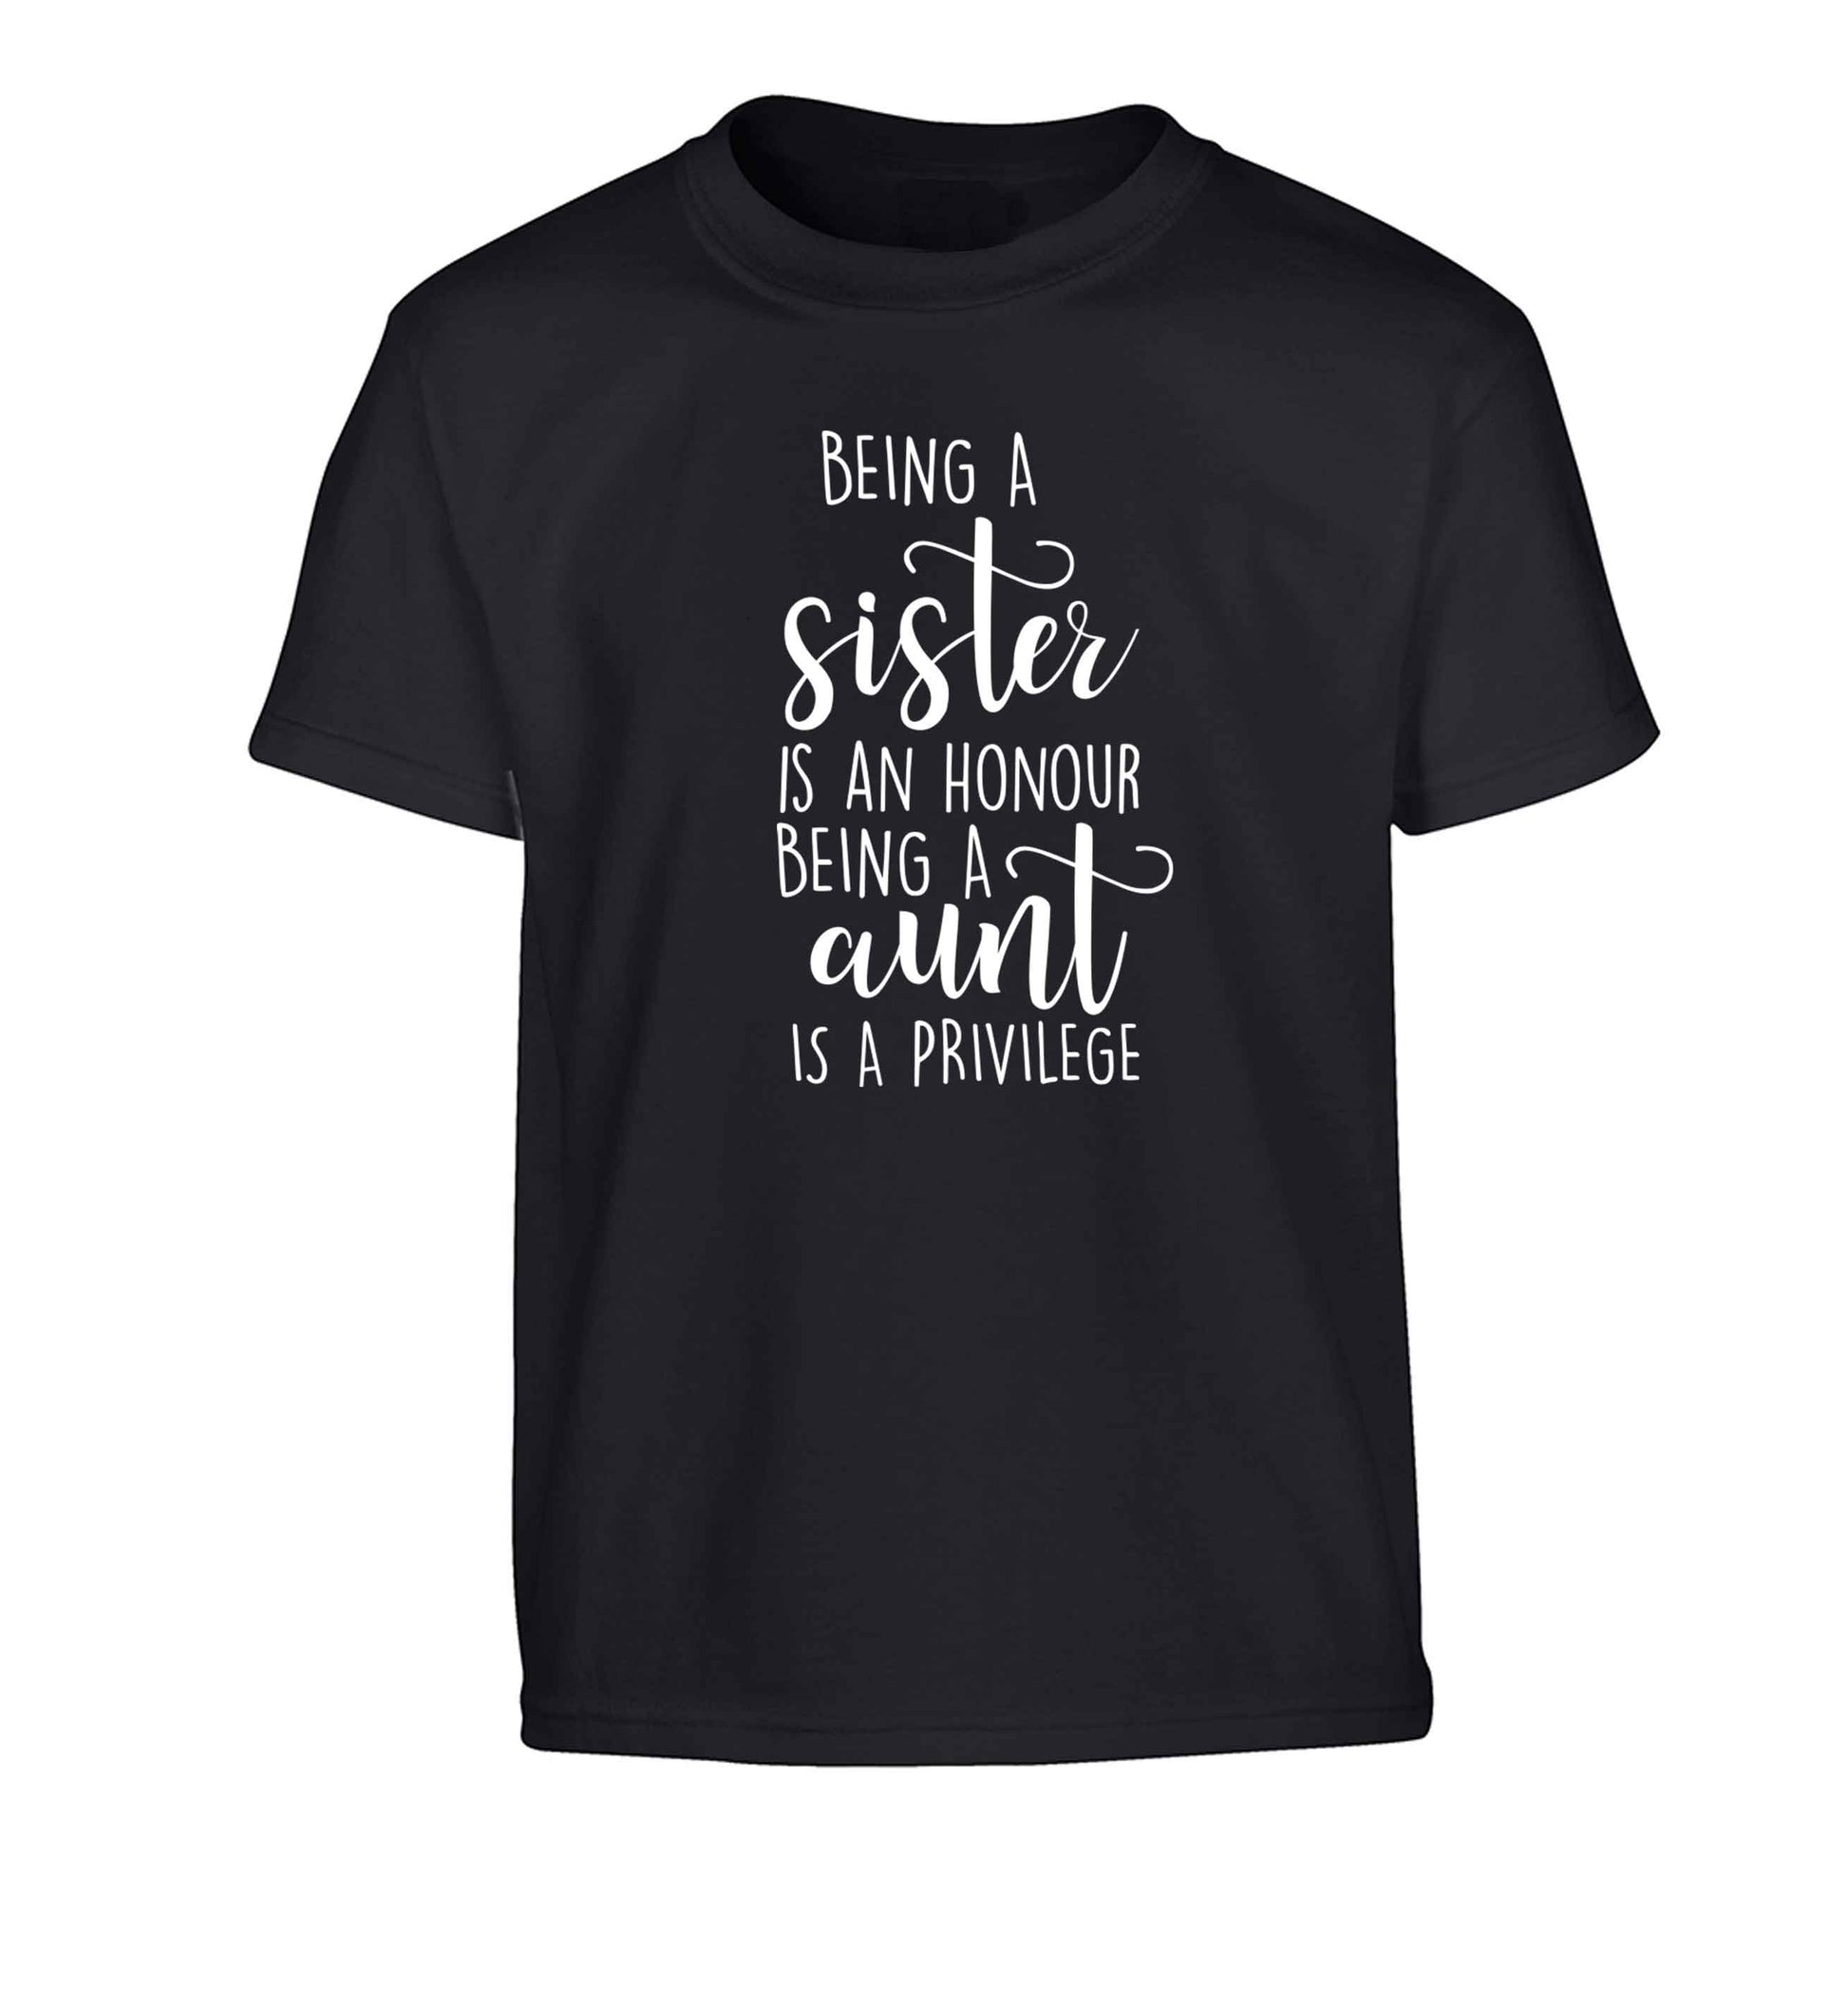 Being a sister is an honour being an auntie is a privilege Children's black Tshirt 12-13 Years